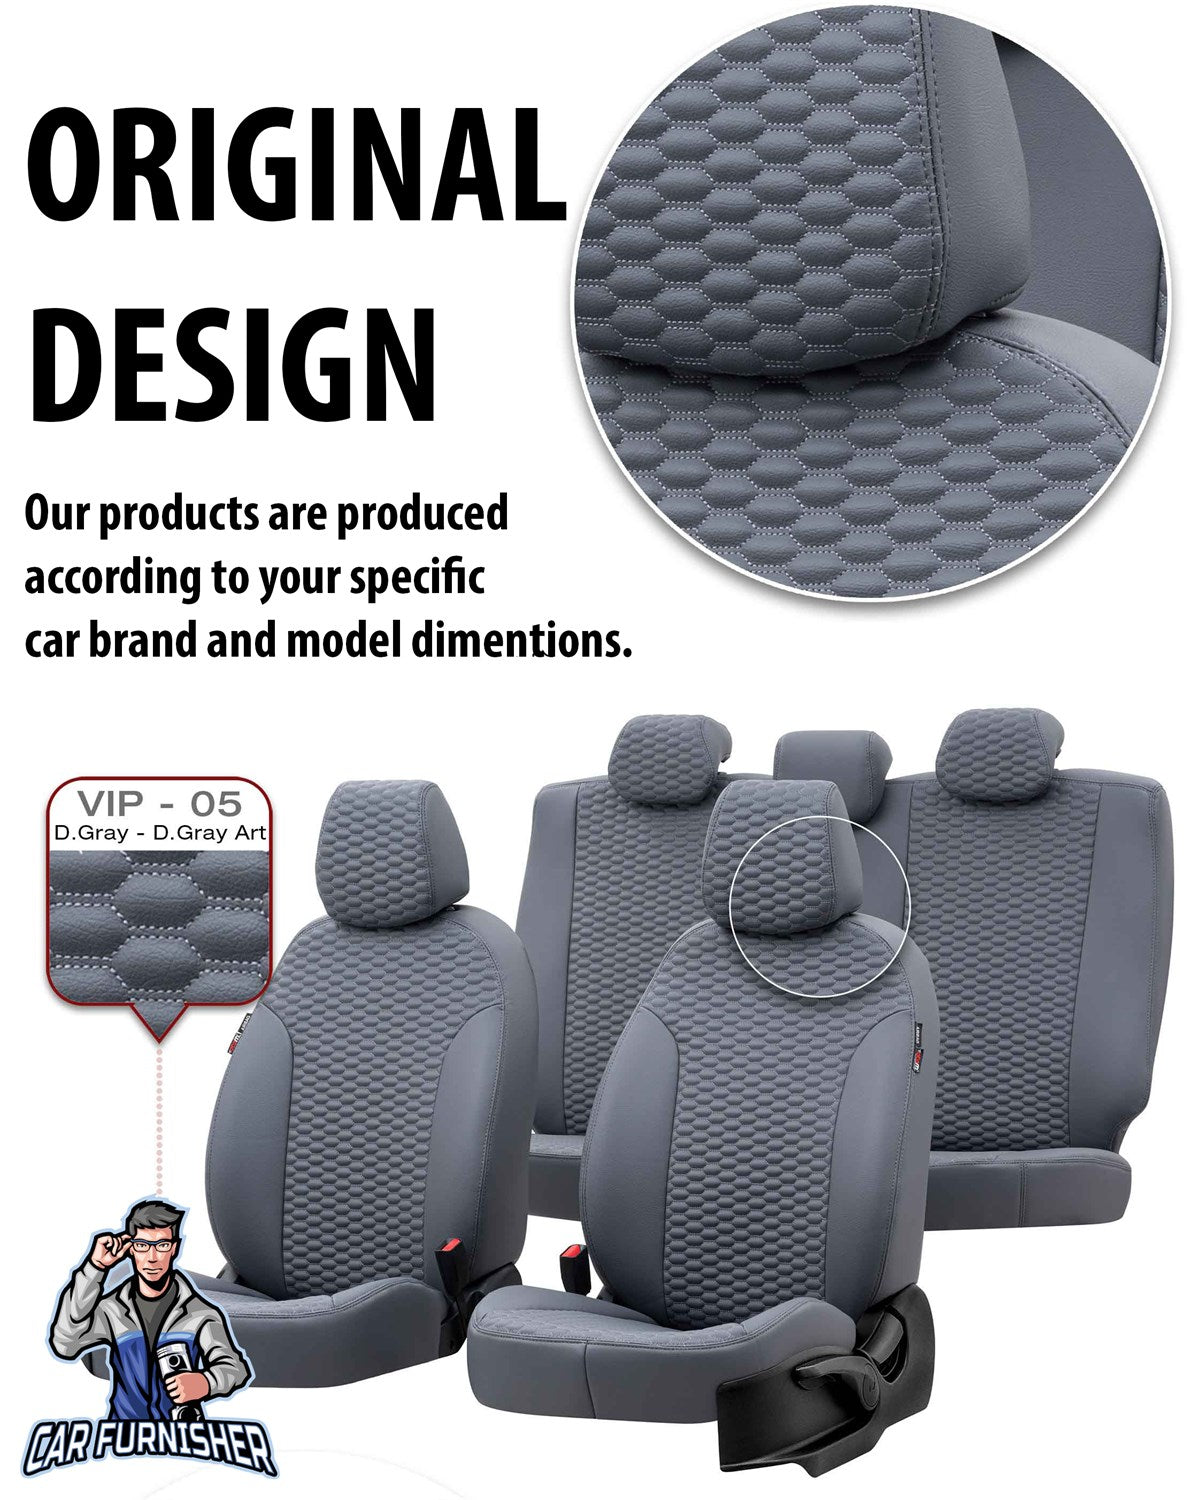 Seat Leon Seat Covers Tokyo Leather Design Dark Gray Leather